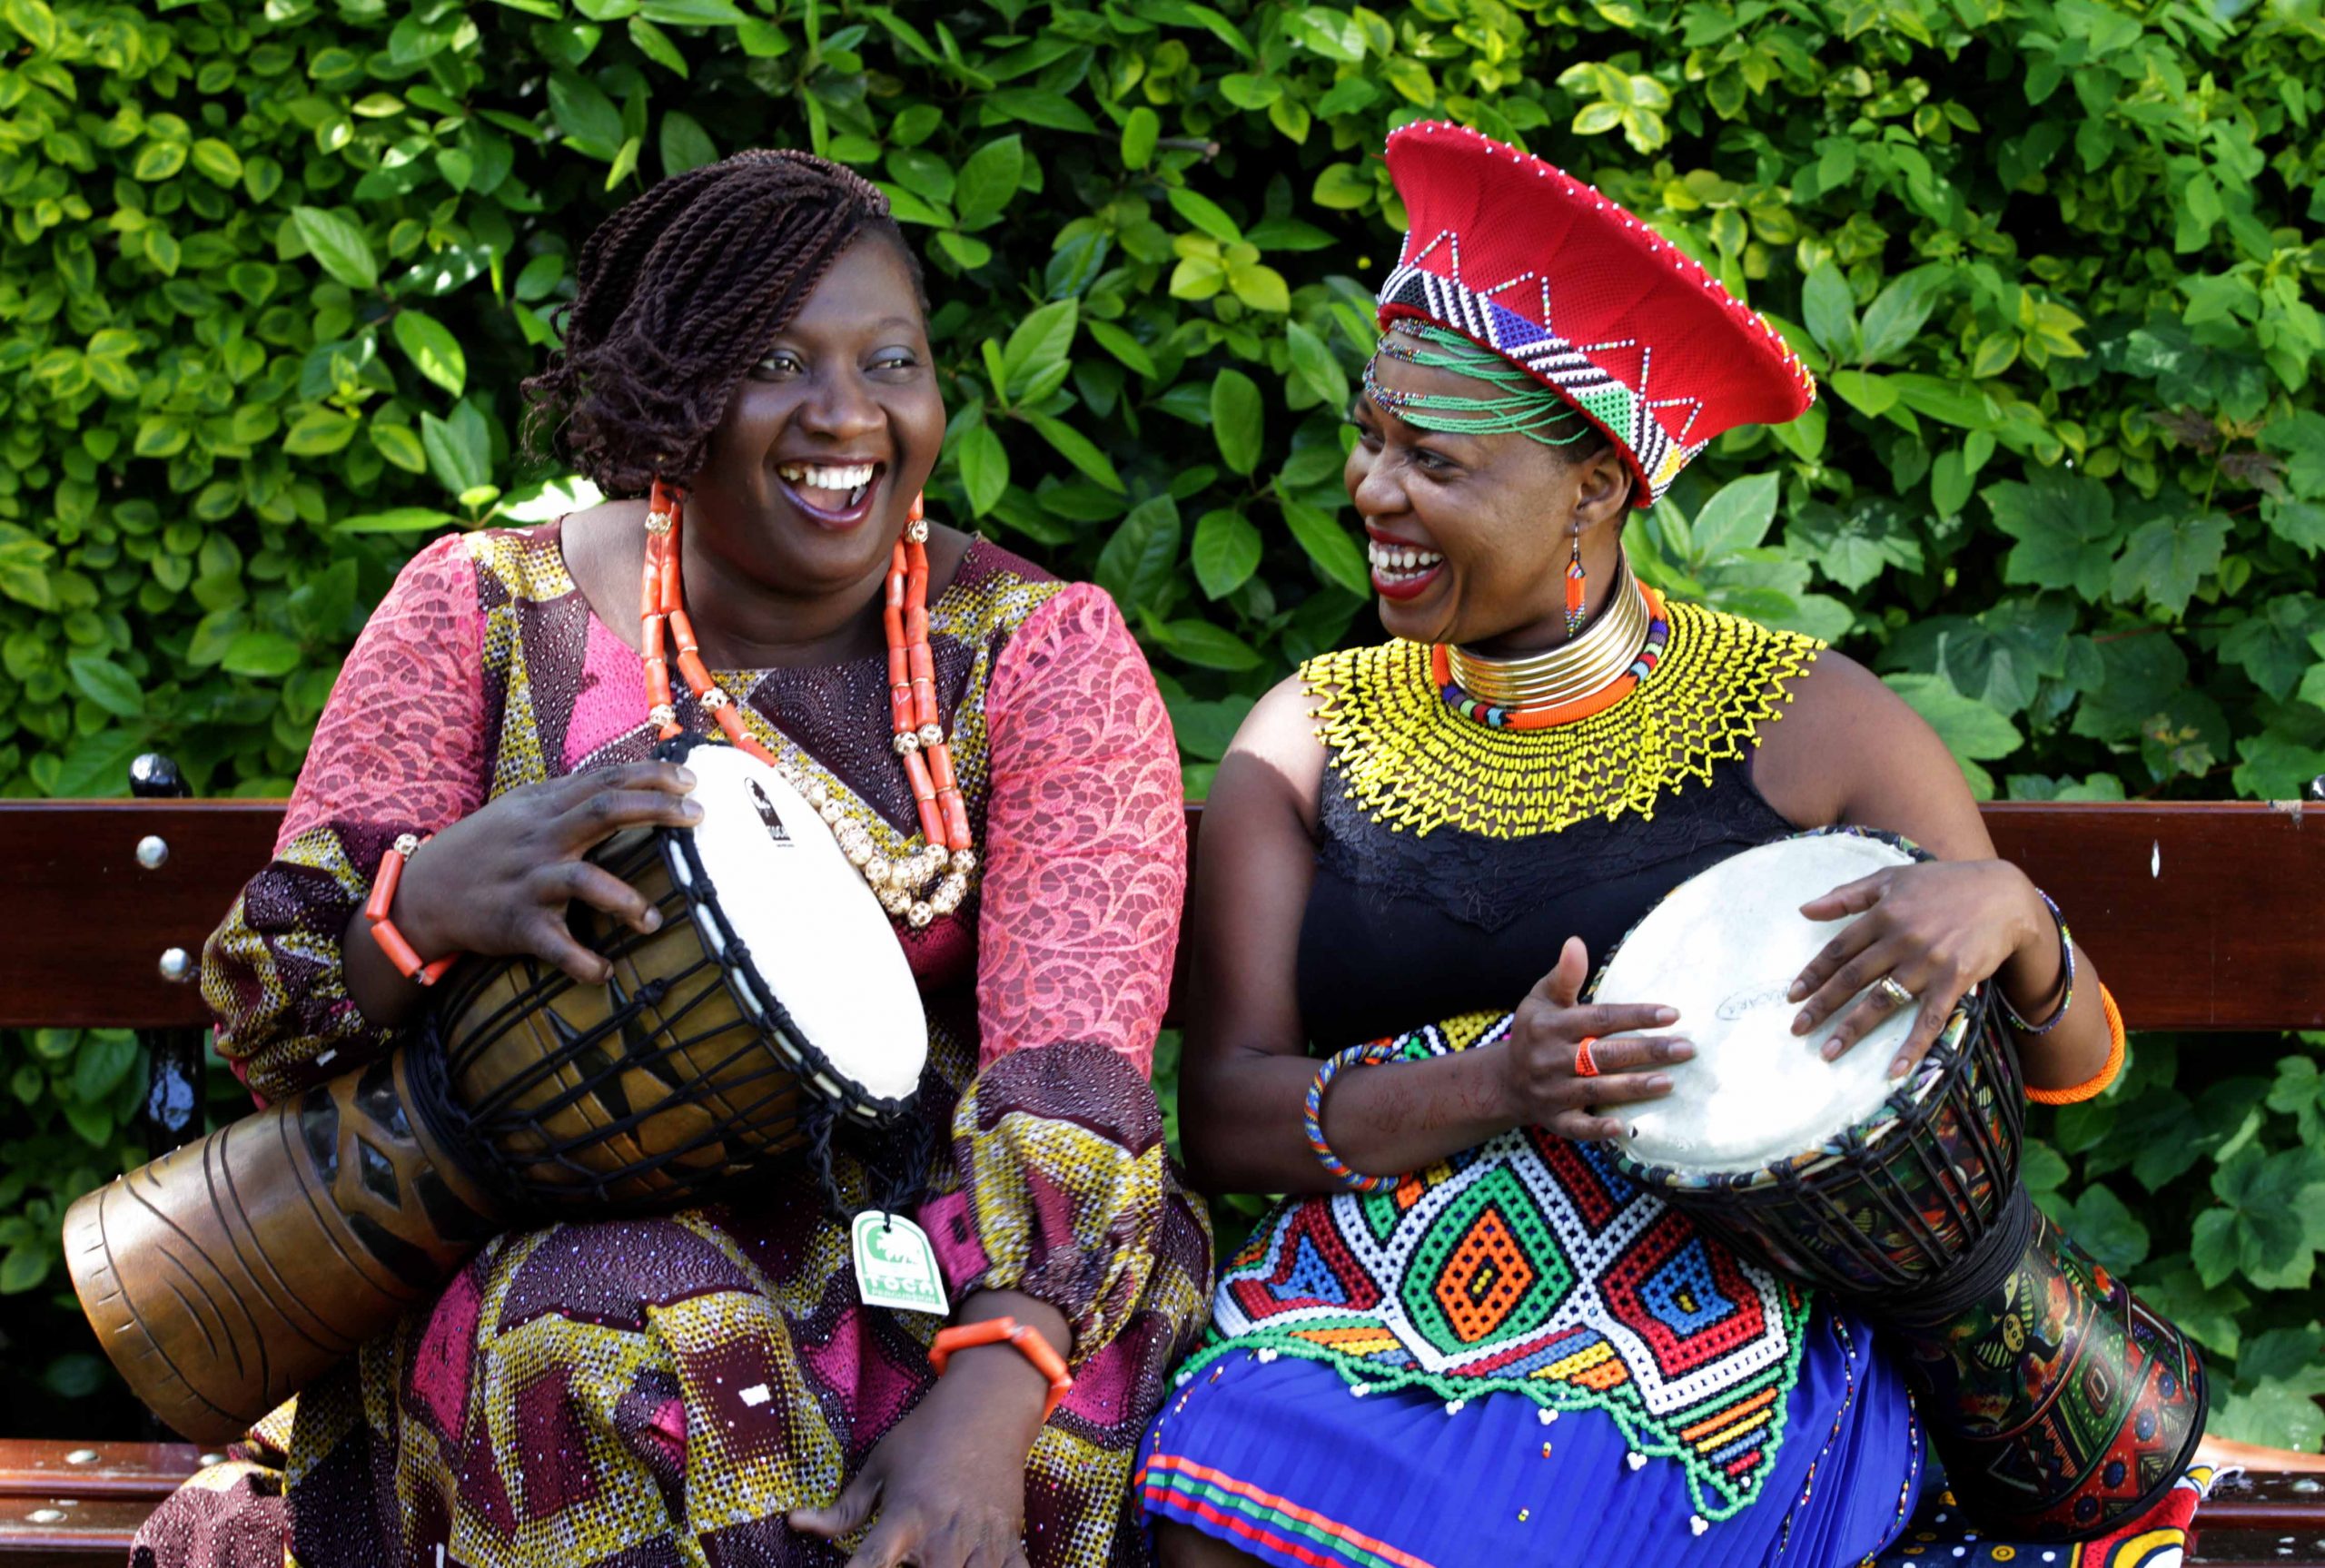 Africa Day 2021 is being celebrated with a series of online events for 2021.